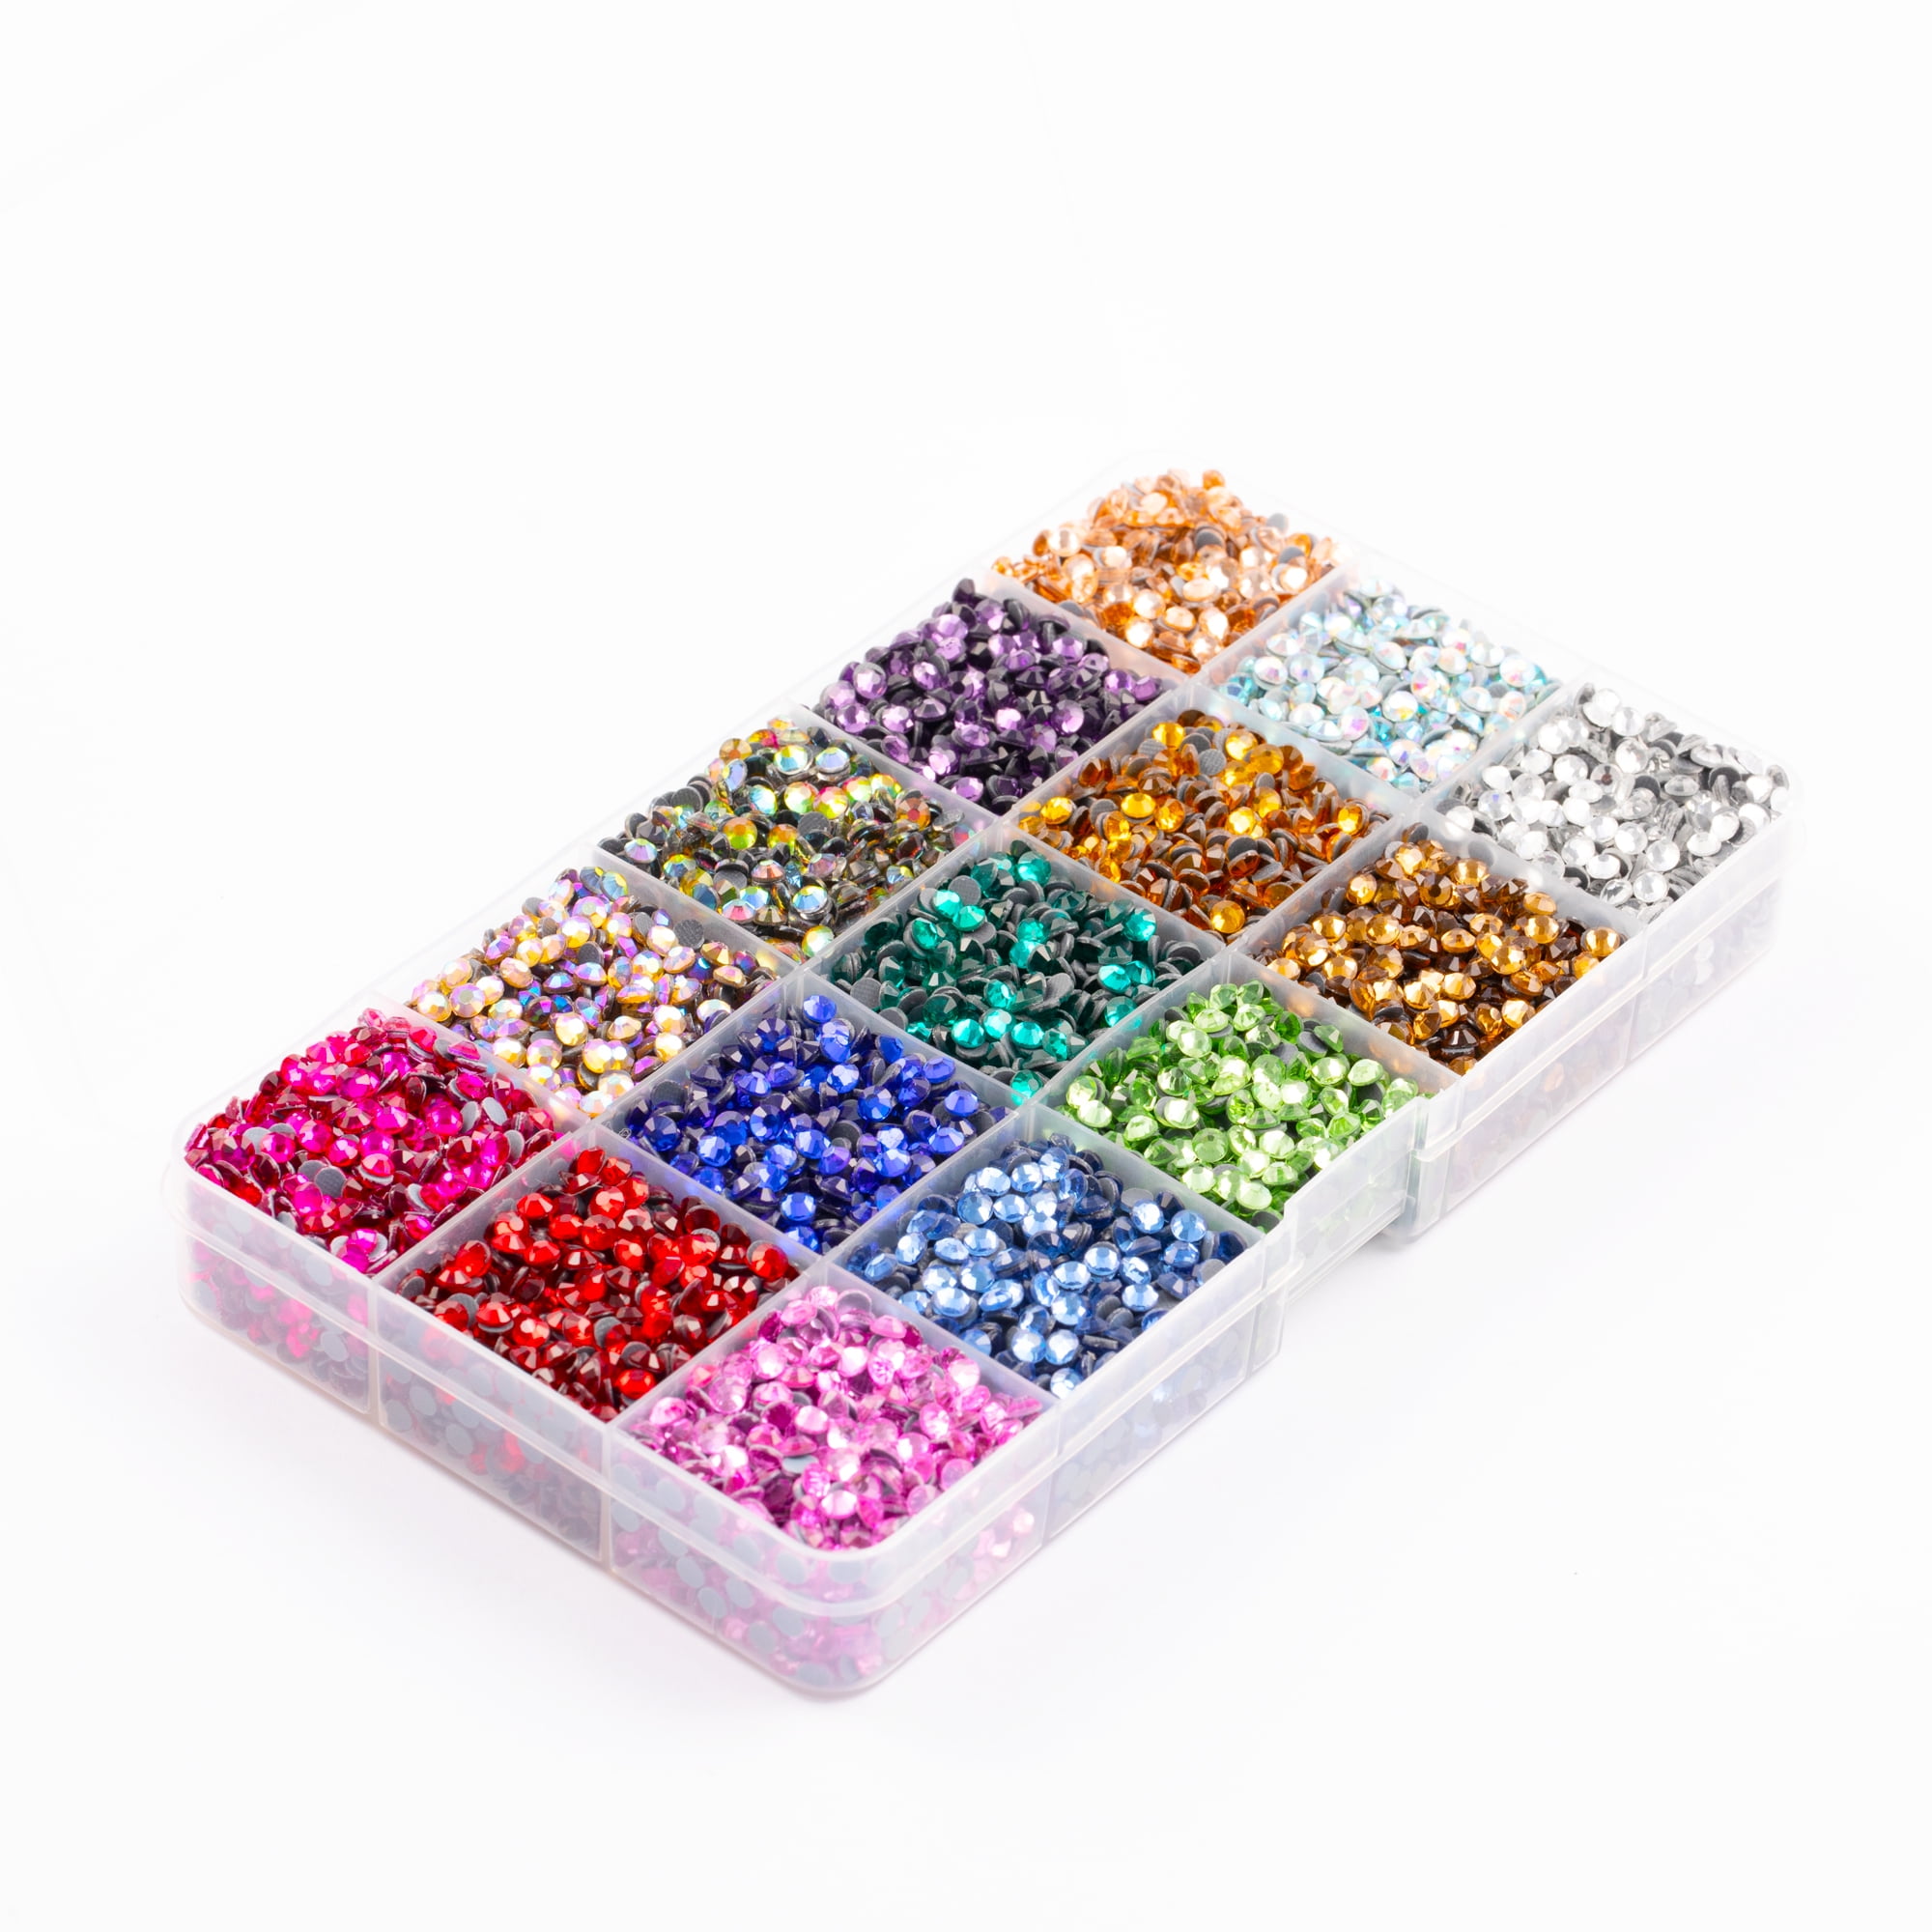 Worthofbest Bedazzler Kit with Rhinestones, Hotfix Rhinestone Applicator  for Fabric and Clothes, Age: 12 and Above 